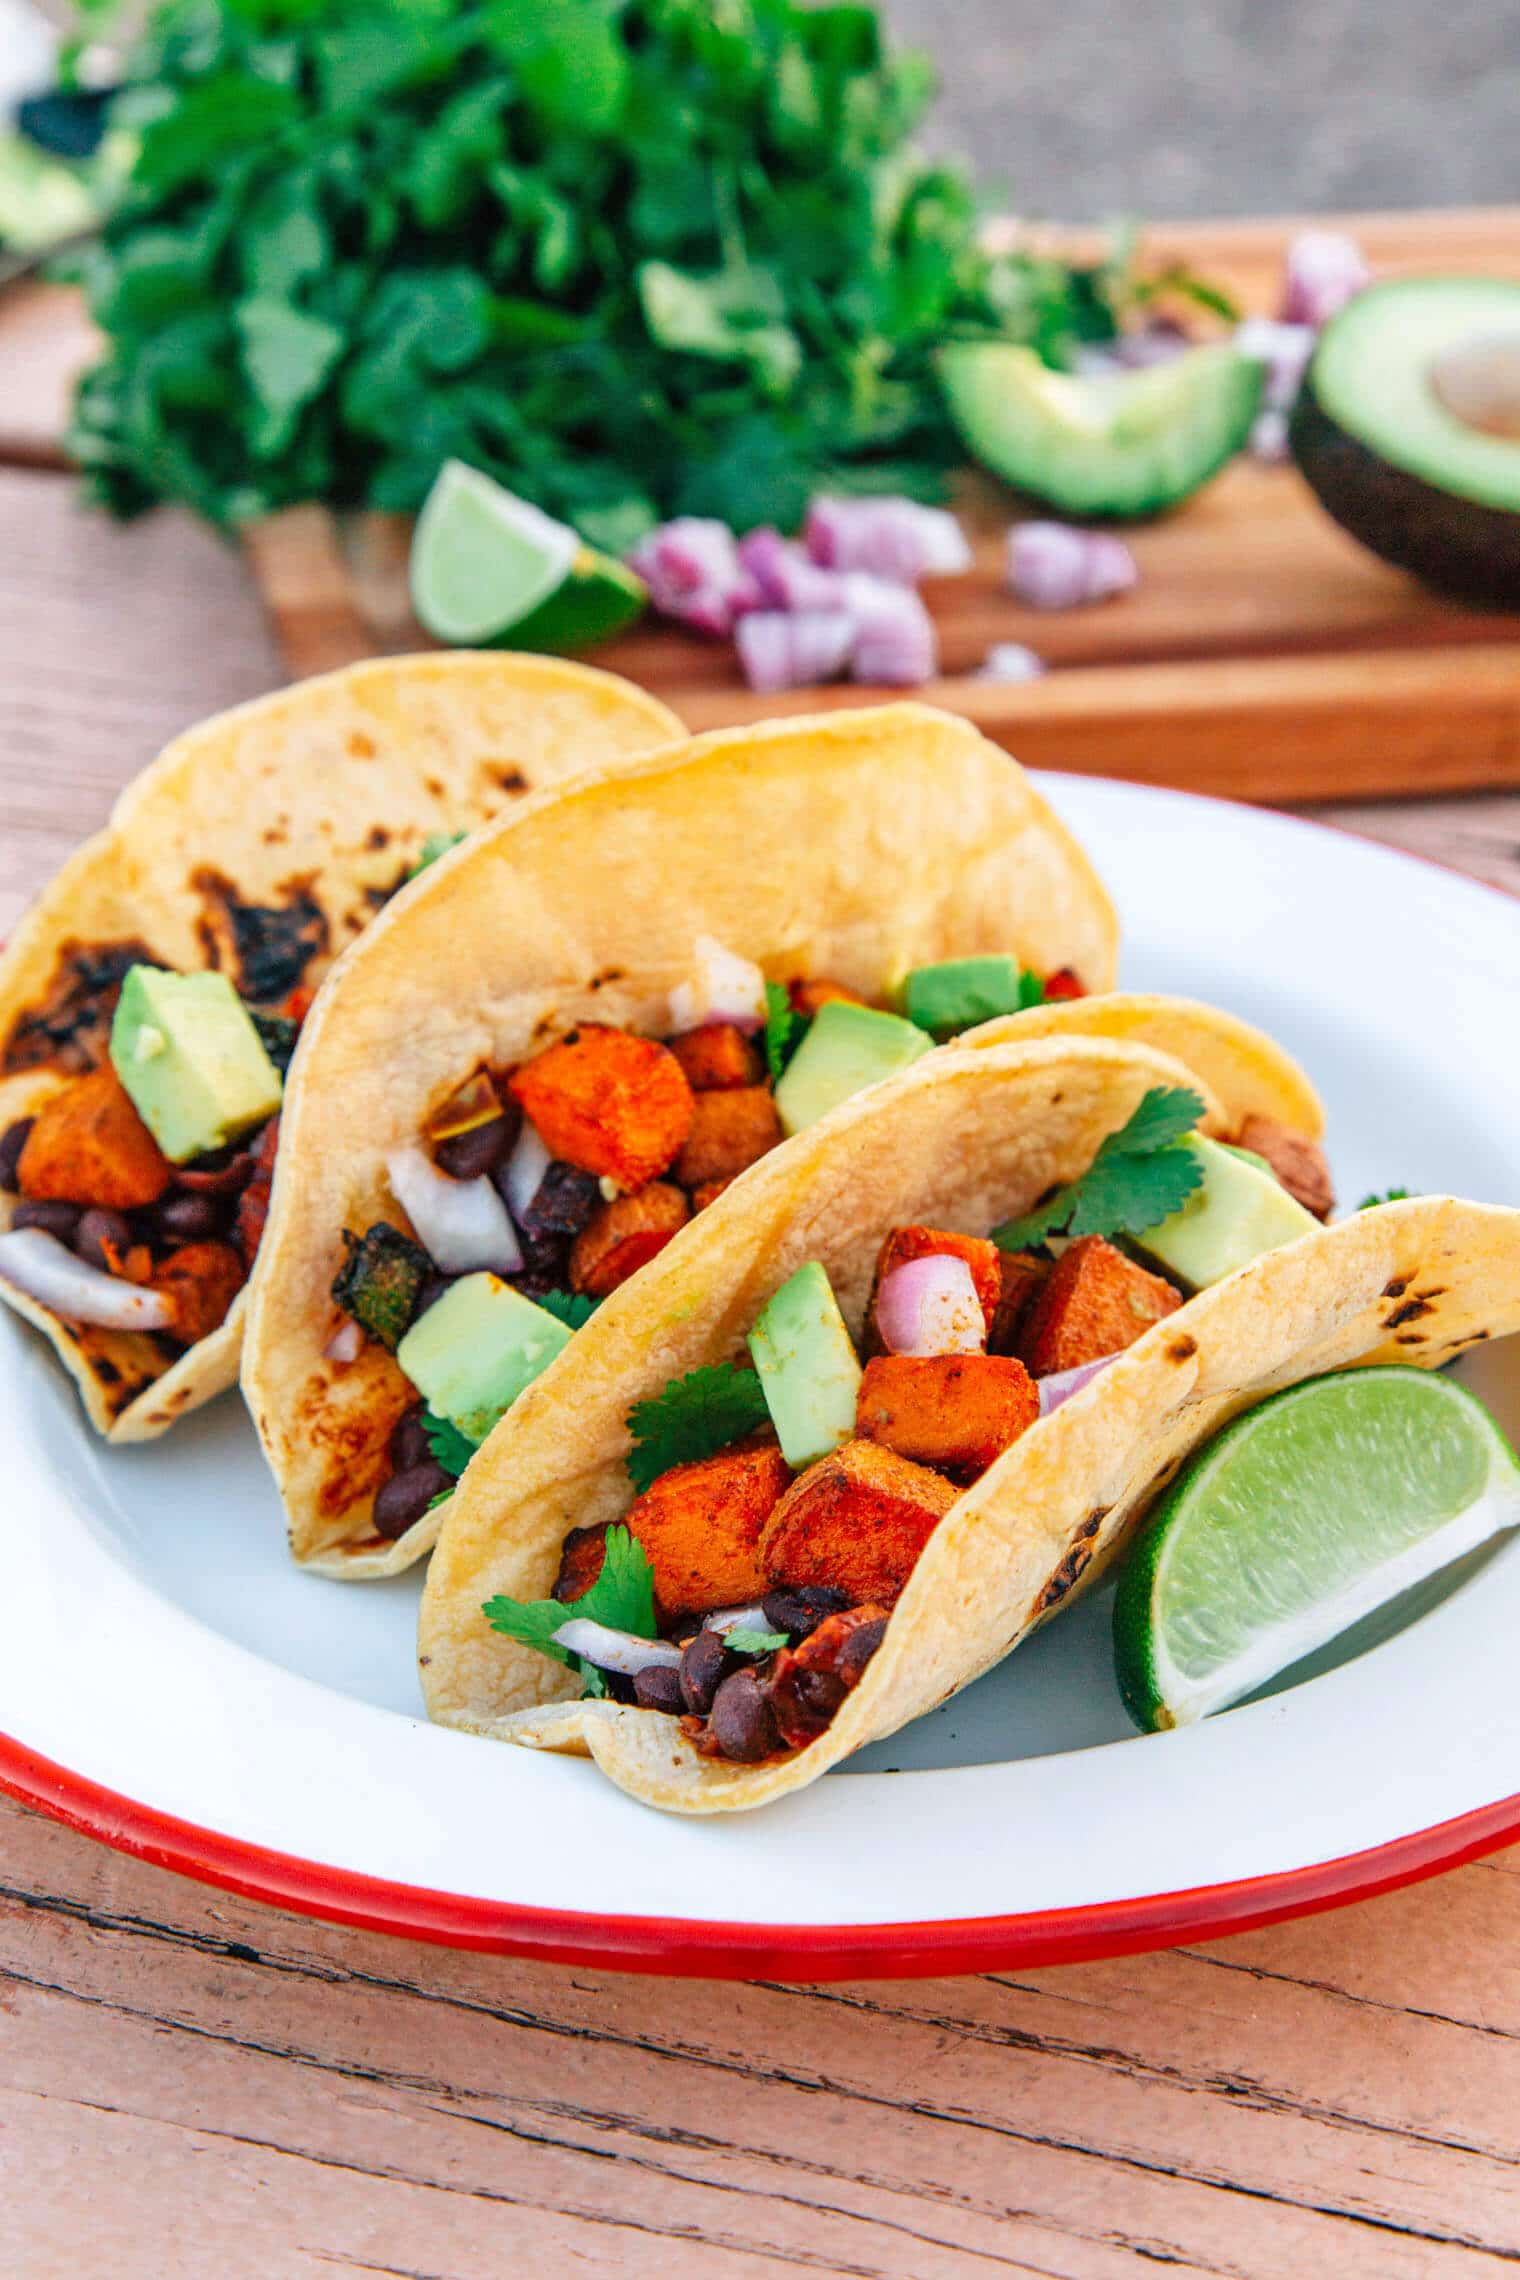 These #vegan Sweet Potato Tacos with smoky black beans are super simple to prepare over the fire on your next camping trip.